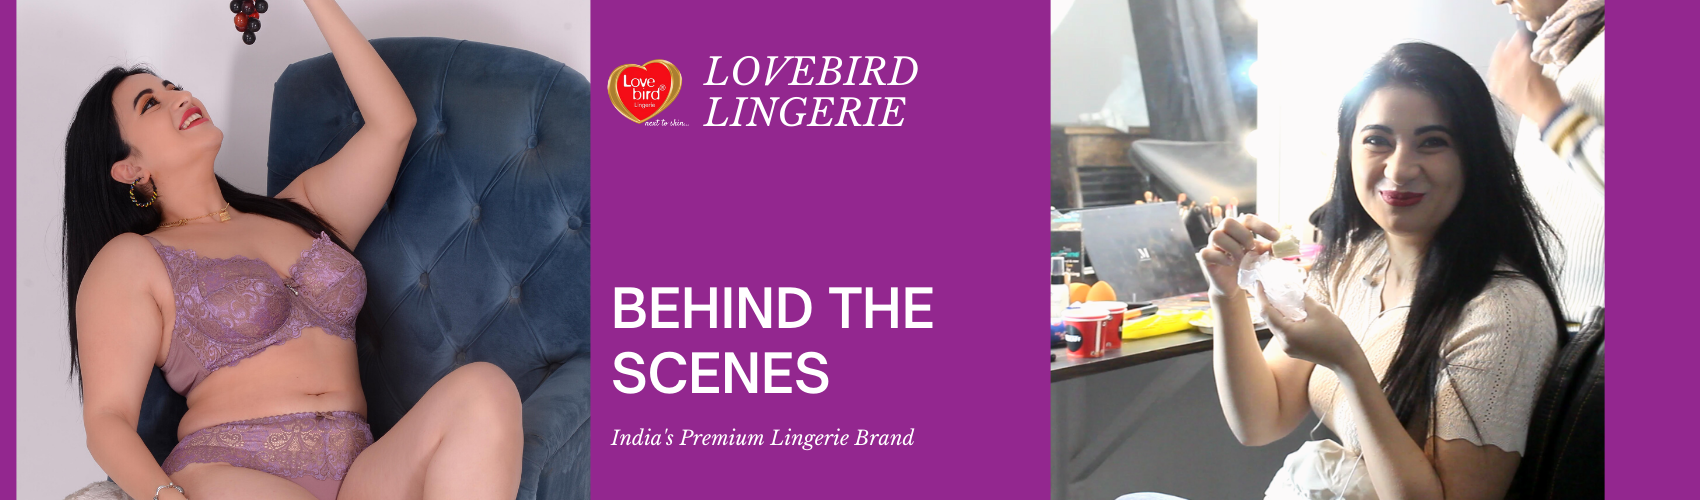 Behind The Scenes of an Indian Lingerie Shoot